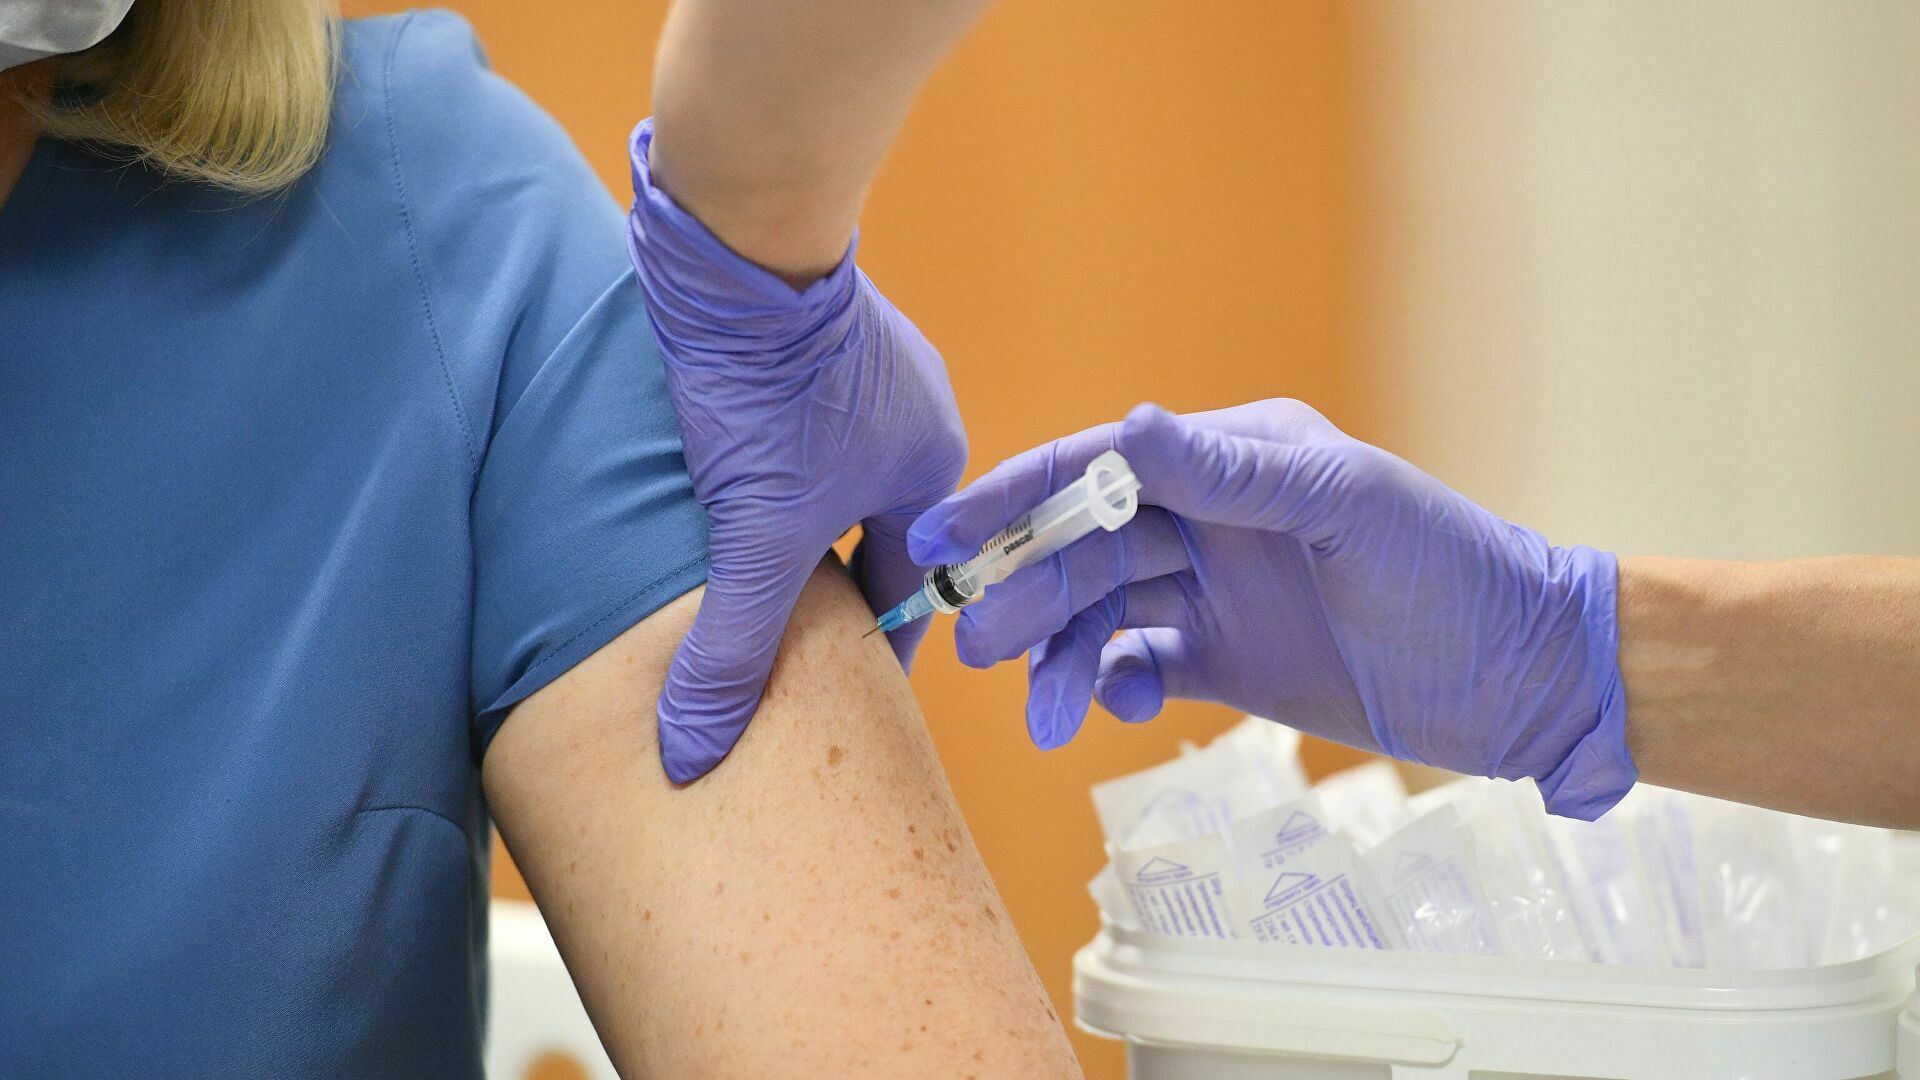 For the first time, mandatory vaccination is being introduced in the US, but not for everyone